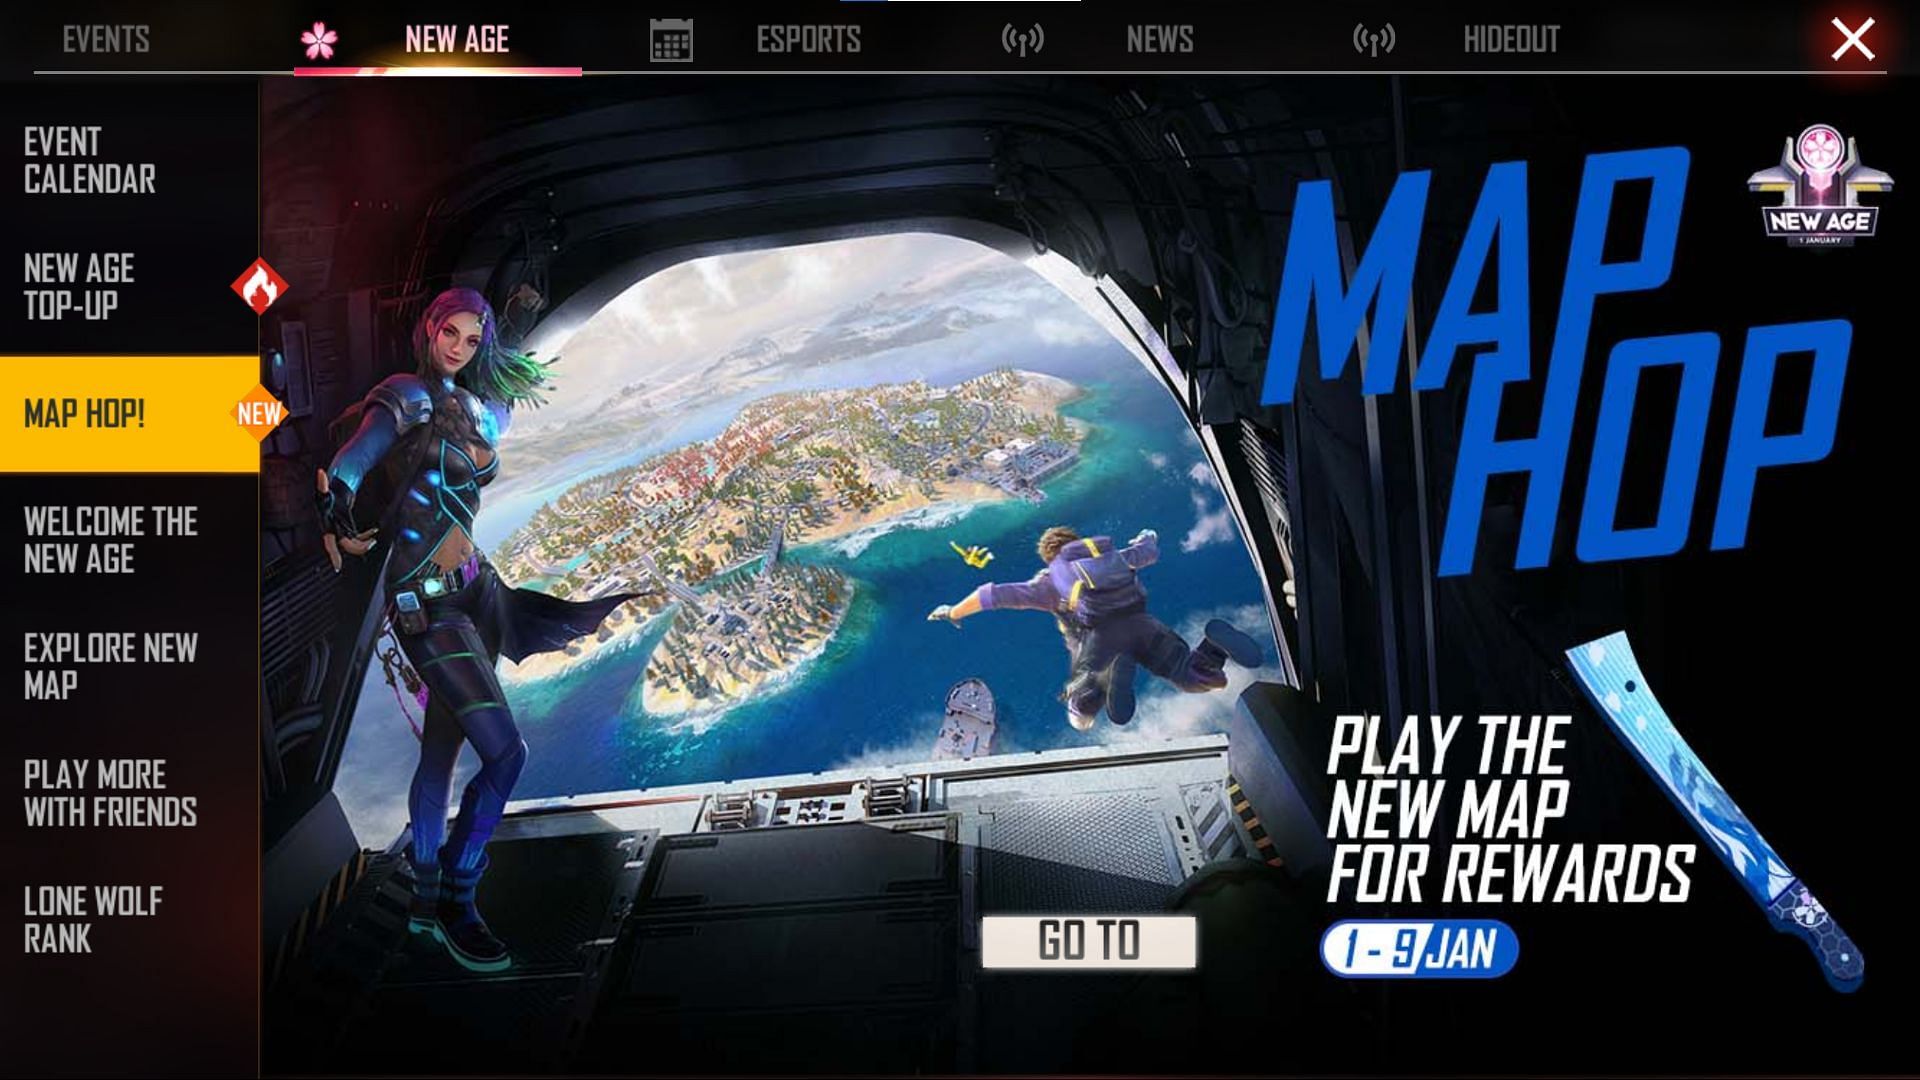 Map Hop! was added after the introduction of Alpine (Image via Free Fire)